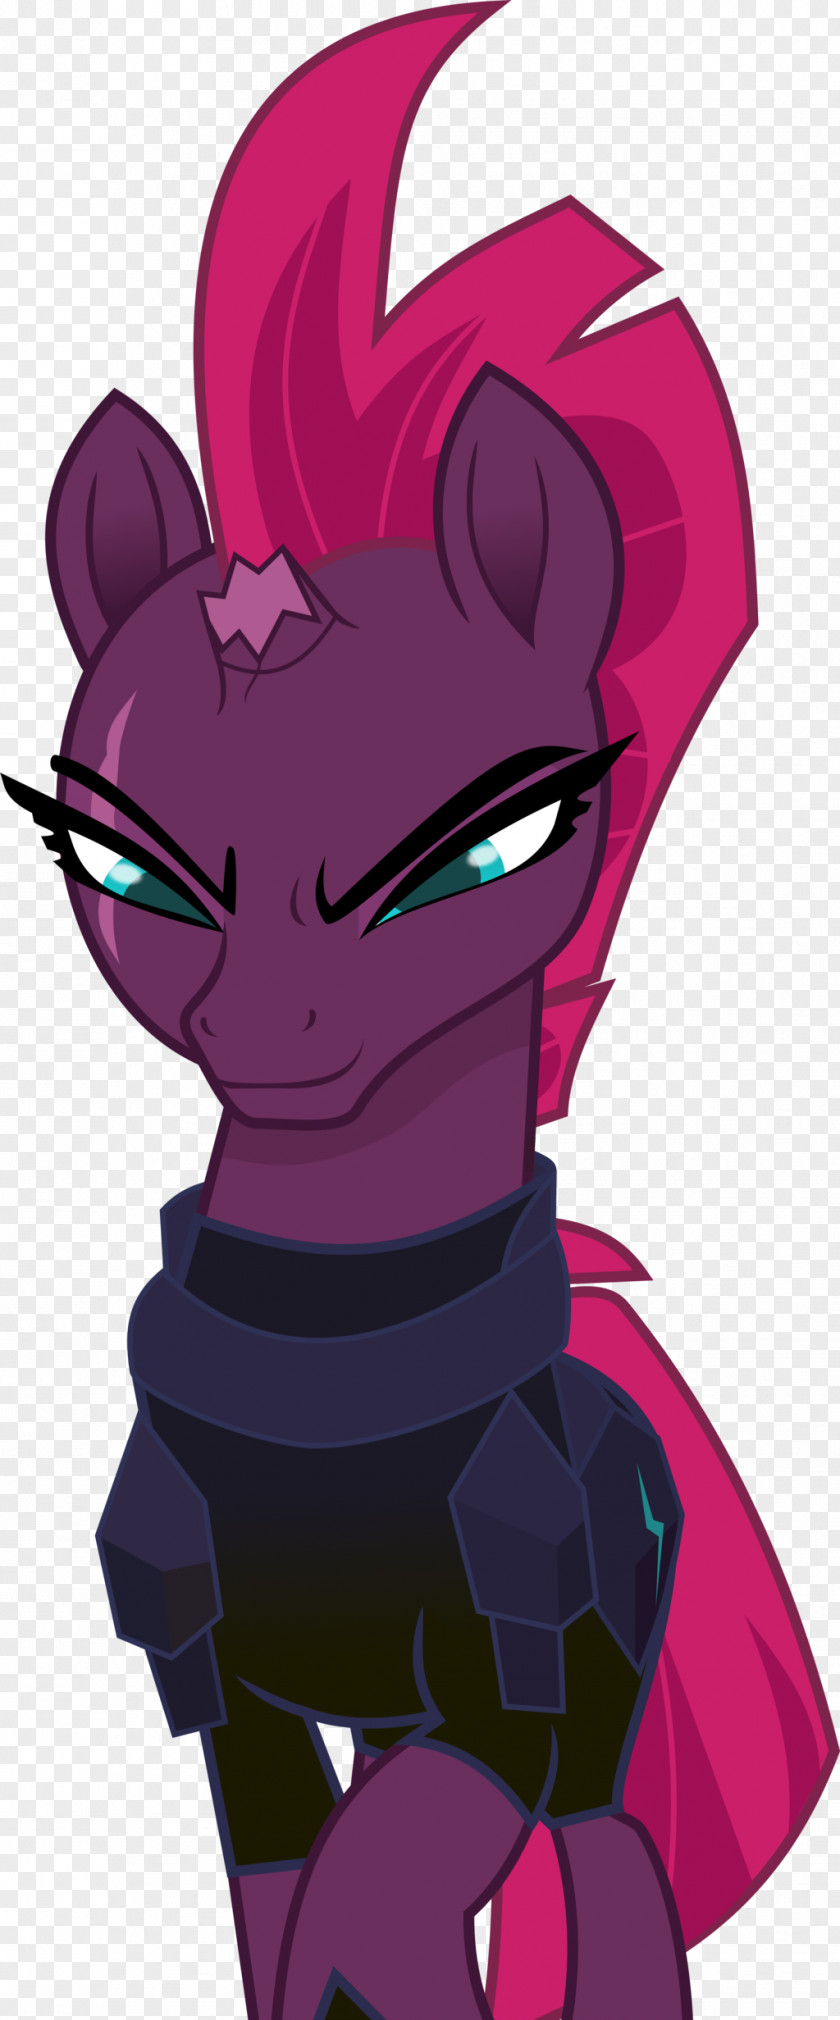 Reads Vector Twilight Sparkle Tempest Shadow Pony The Storm King DeviantArt PNG